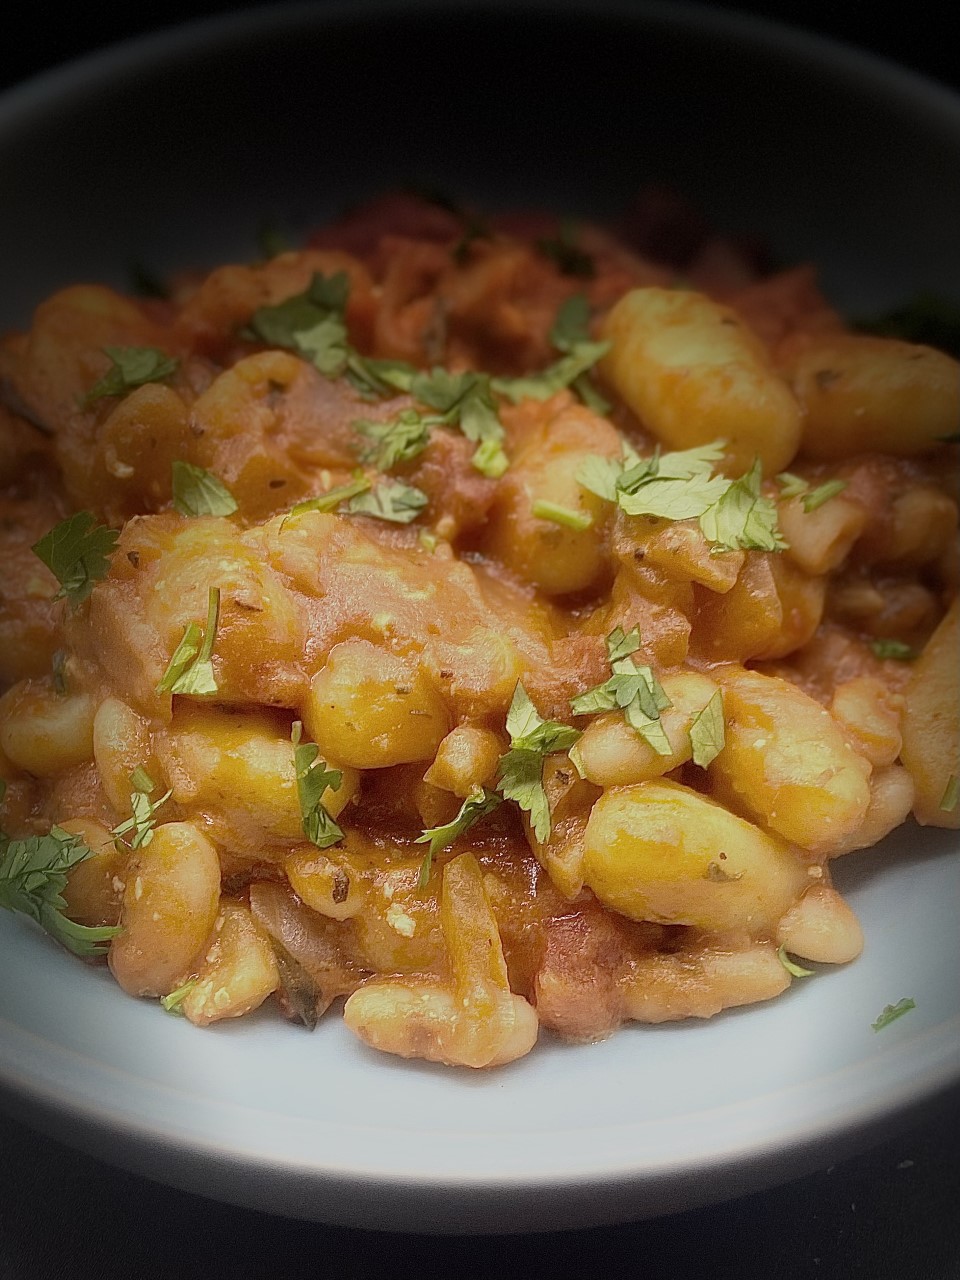 Gnocchi with White Beans and Homemade Tomato Sauce